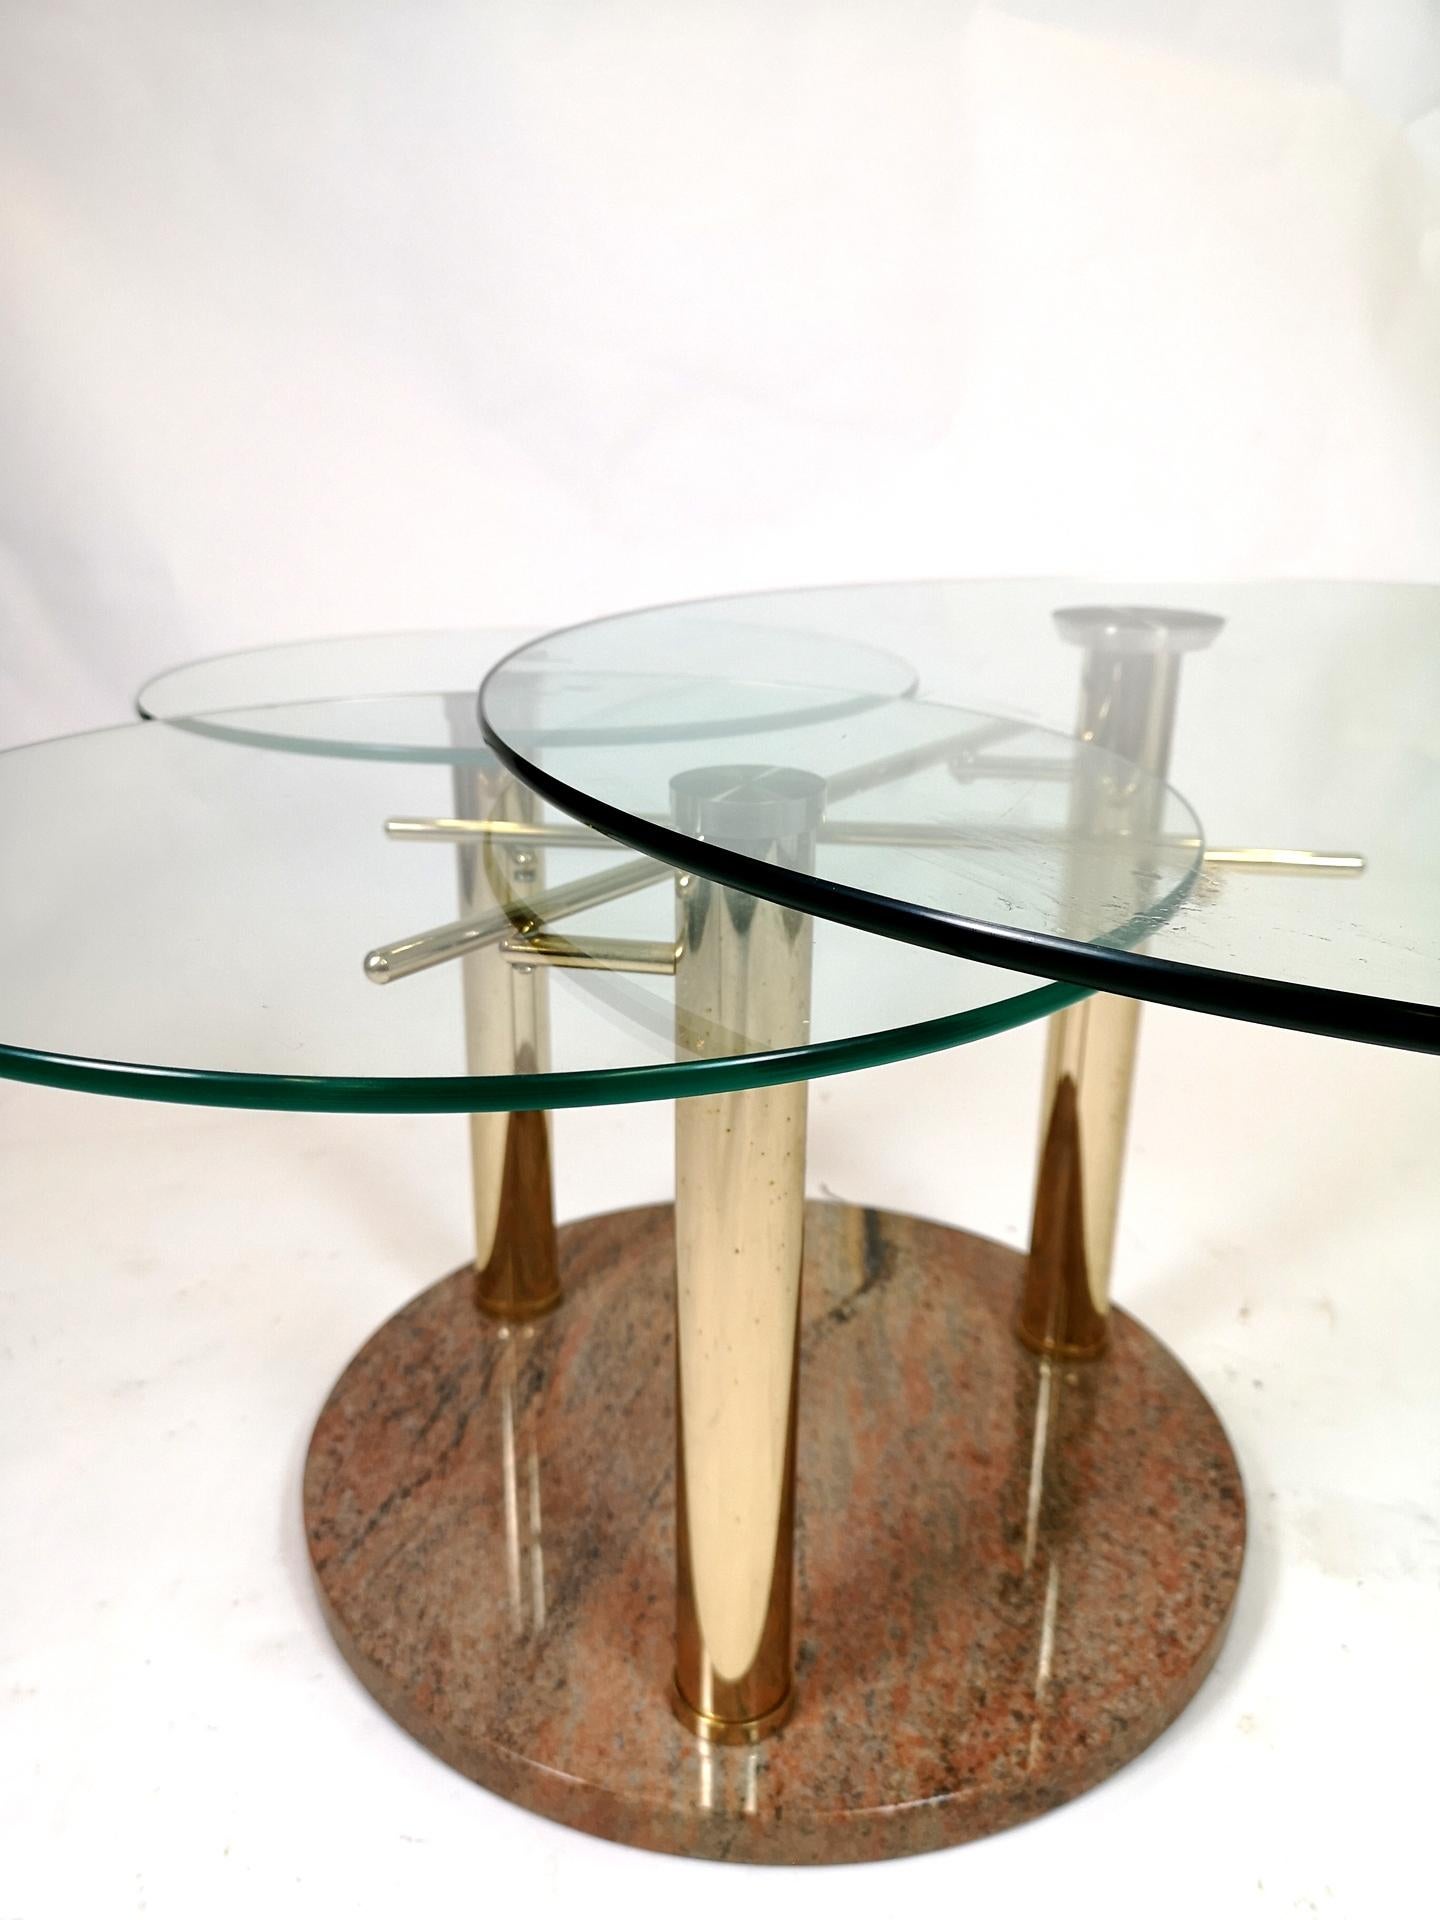 Late 20th Century Chrome-Plated Adjustable Glass Coffee Table with Three Shelves on a Marble Stand